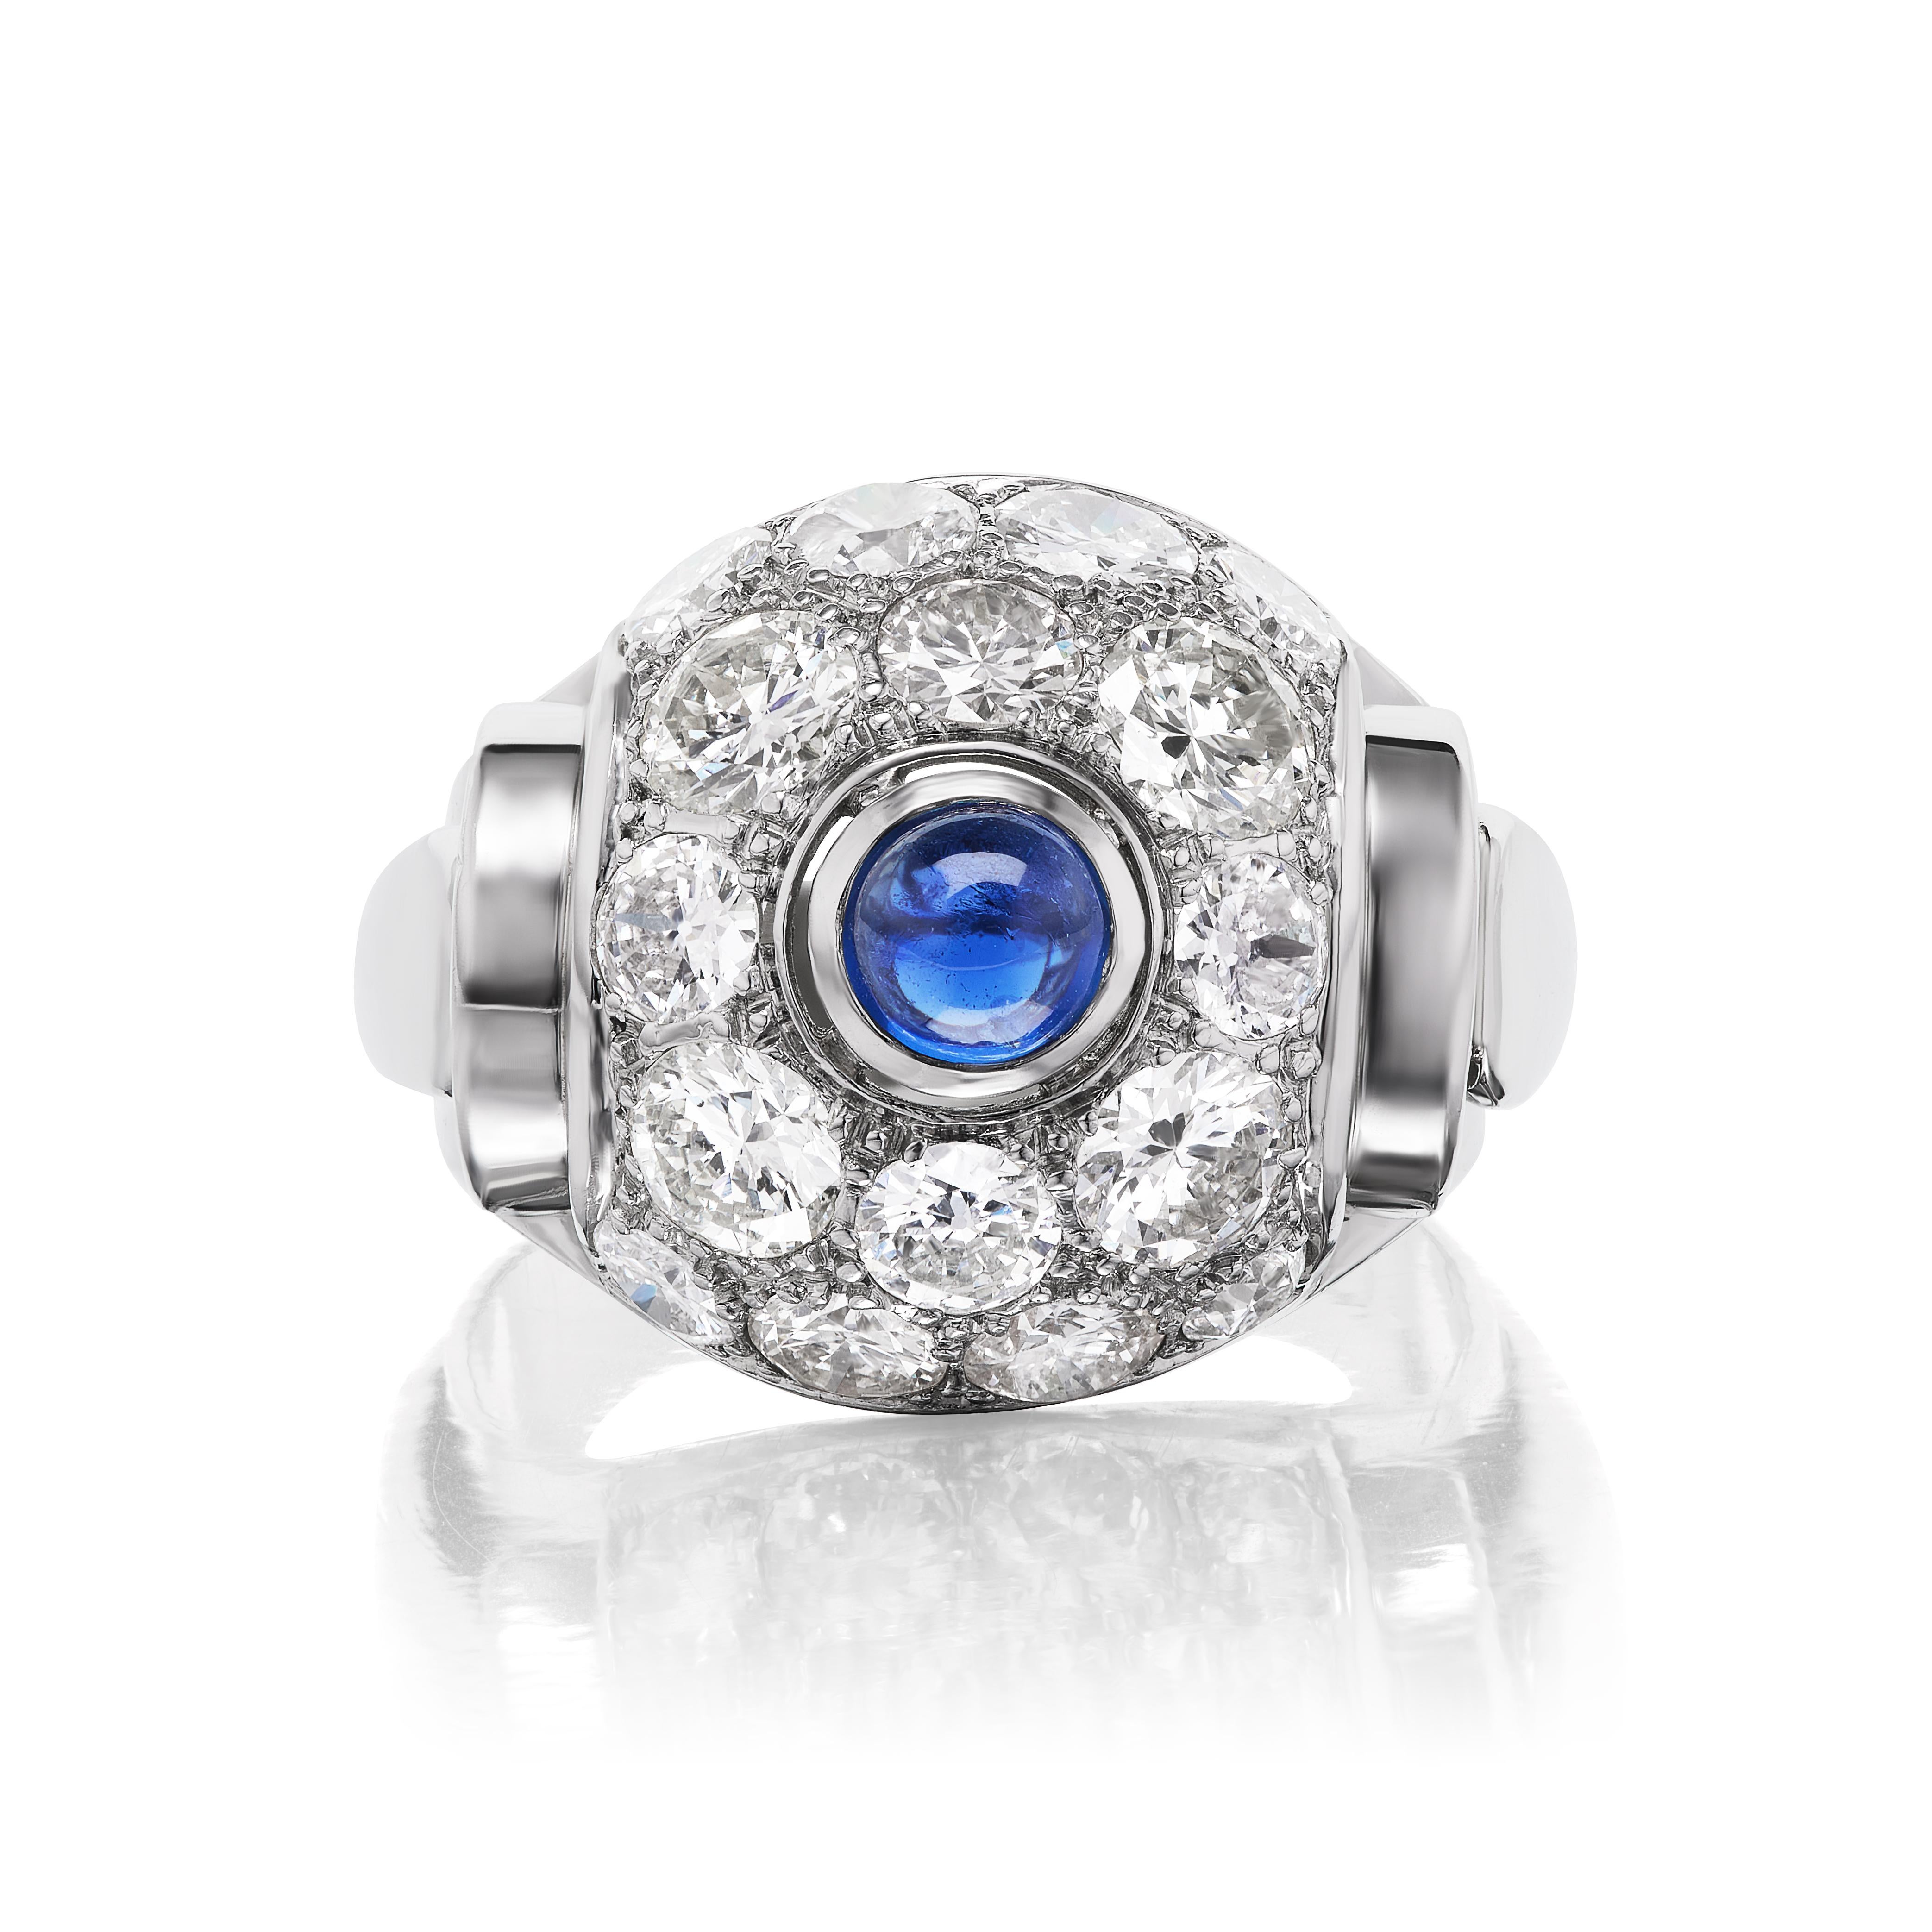 This wonderful and charming Art Deco ring features a pleasant .25 carat cabochon sapphire set in an impressive meadow of 16 round brilliant diamonds weighing approximately 3.20 carats. Set in platinum in very good condition, this ring is an